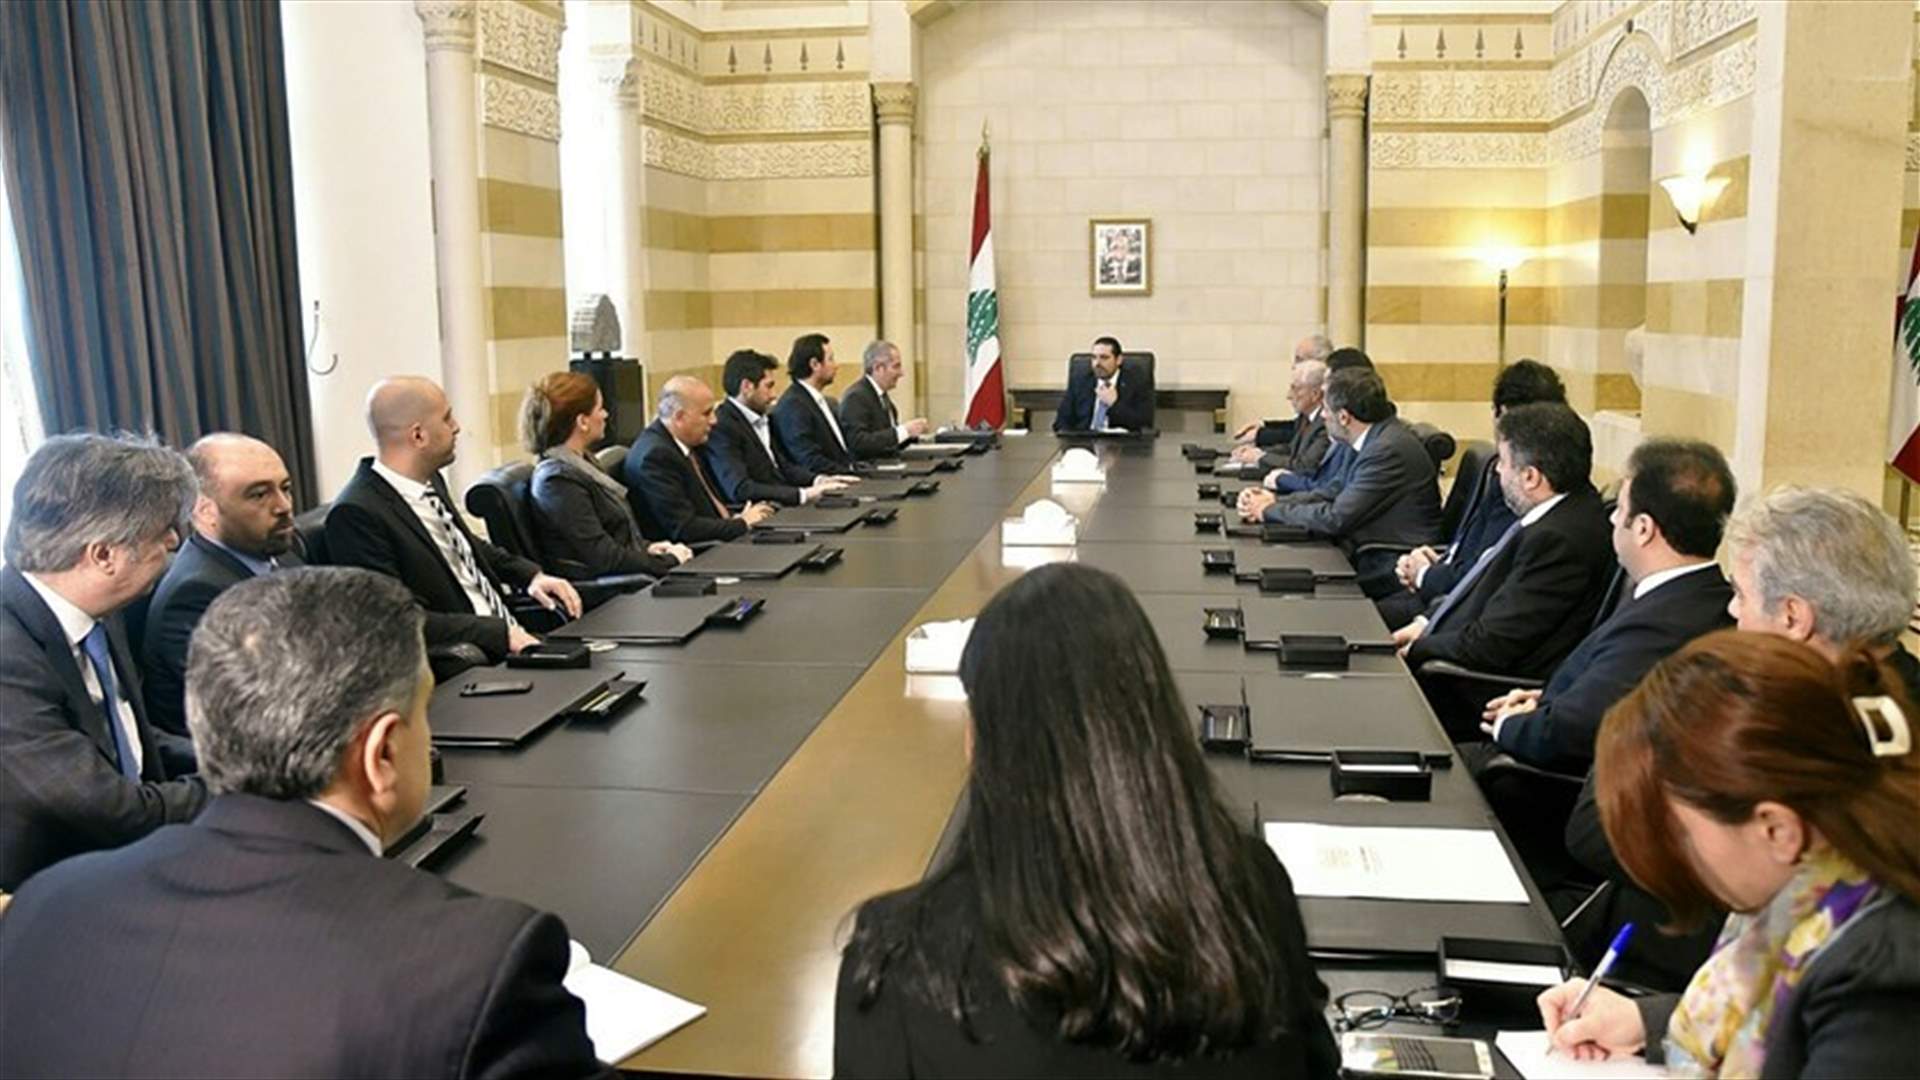 PM Hariri urges everyone to benefit from accord, to strengthen economy